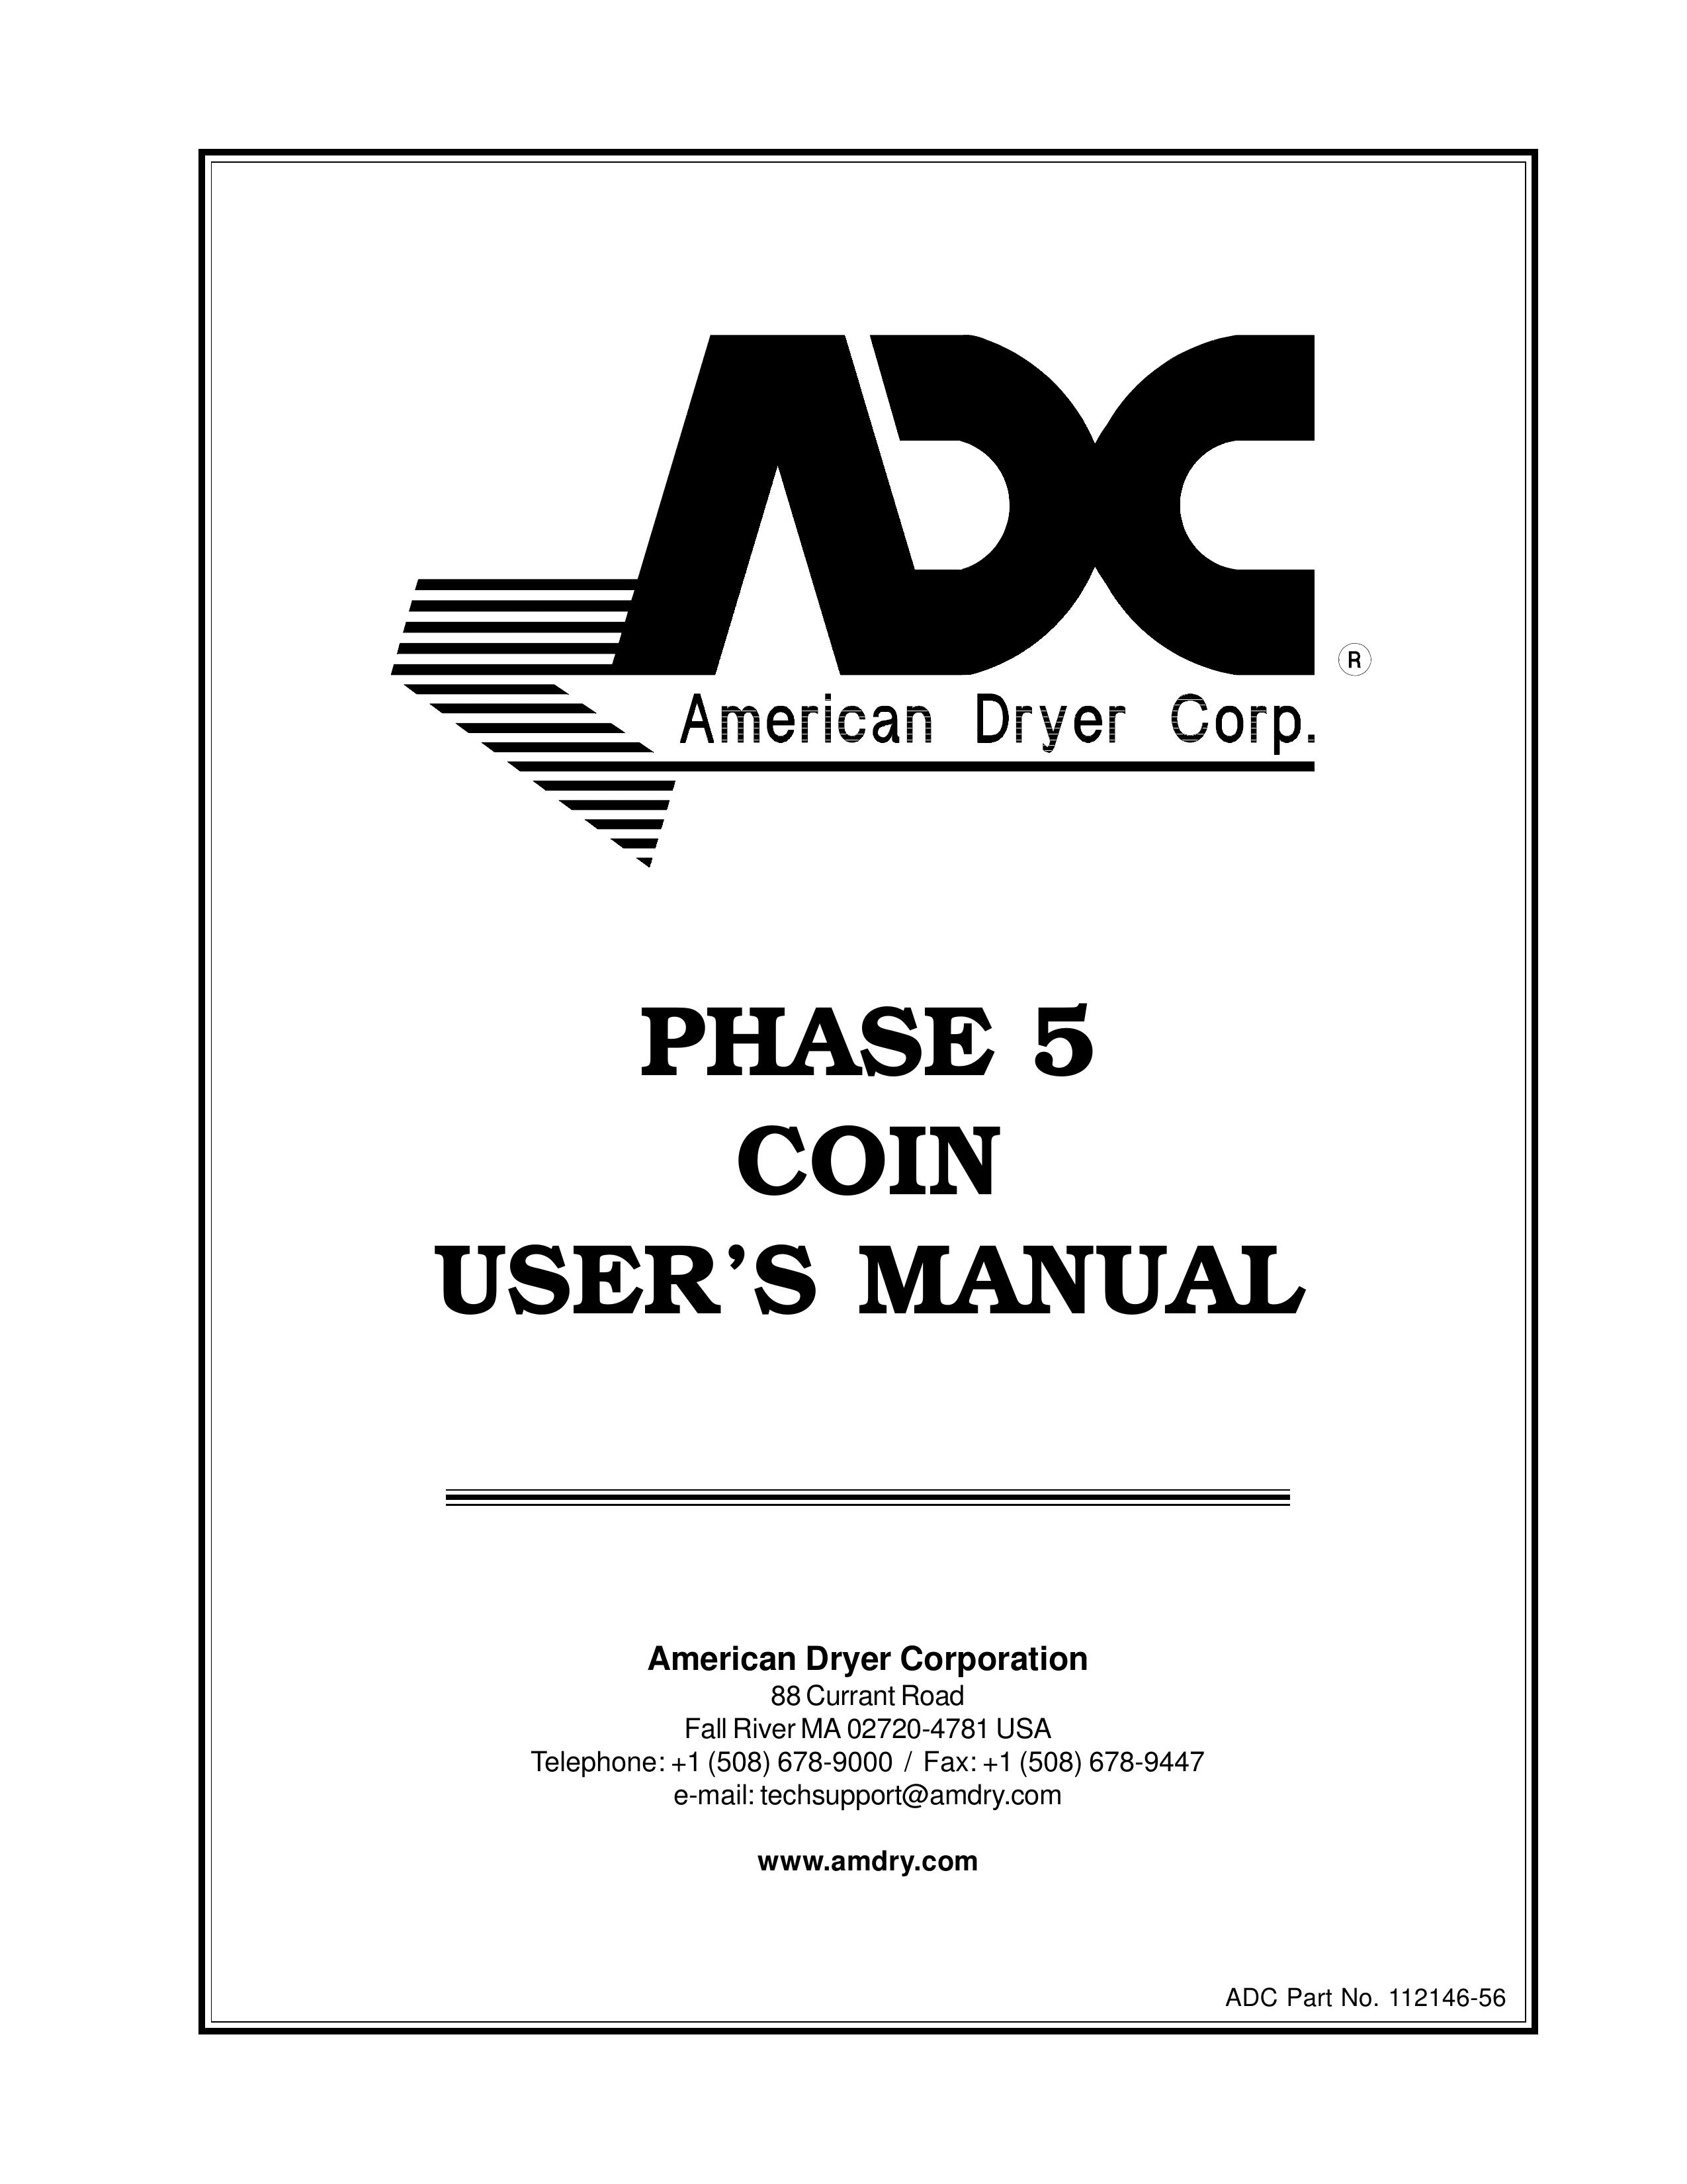 ADC AD-295 Clothes Dryer User Manual